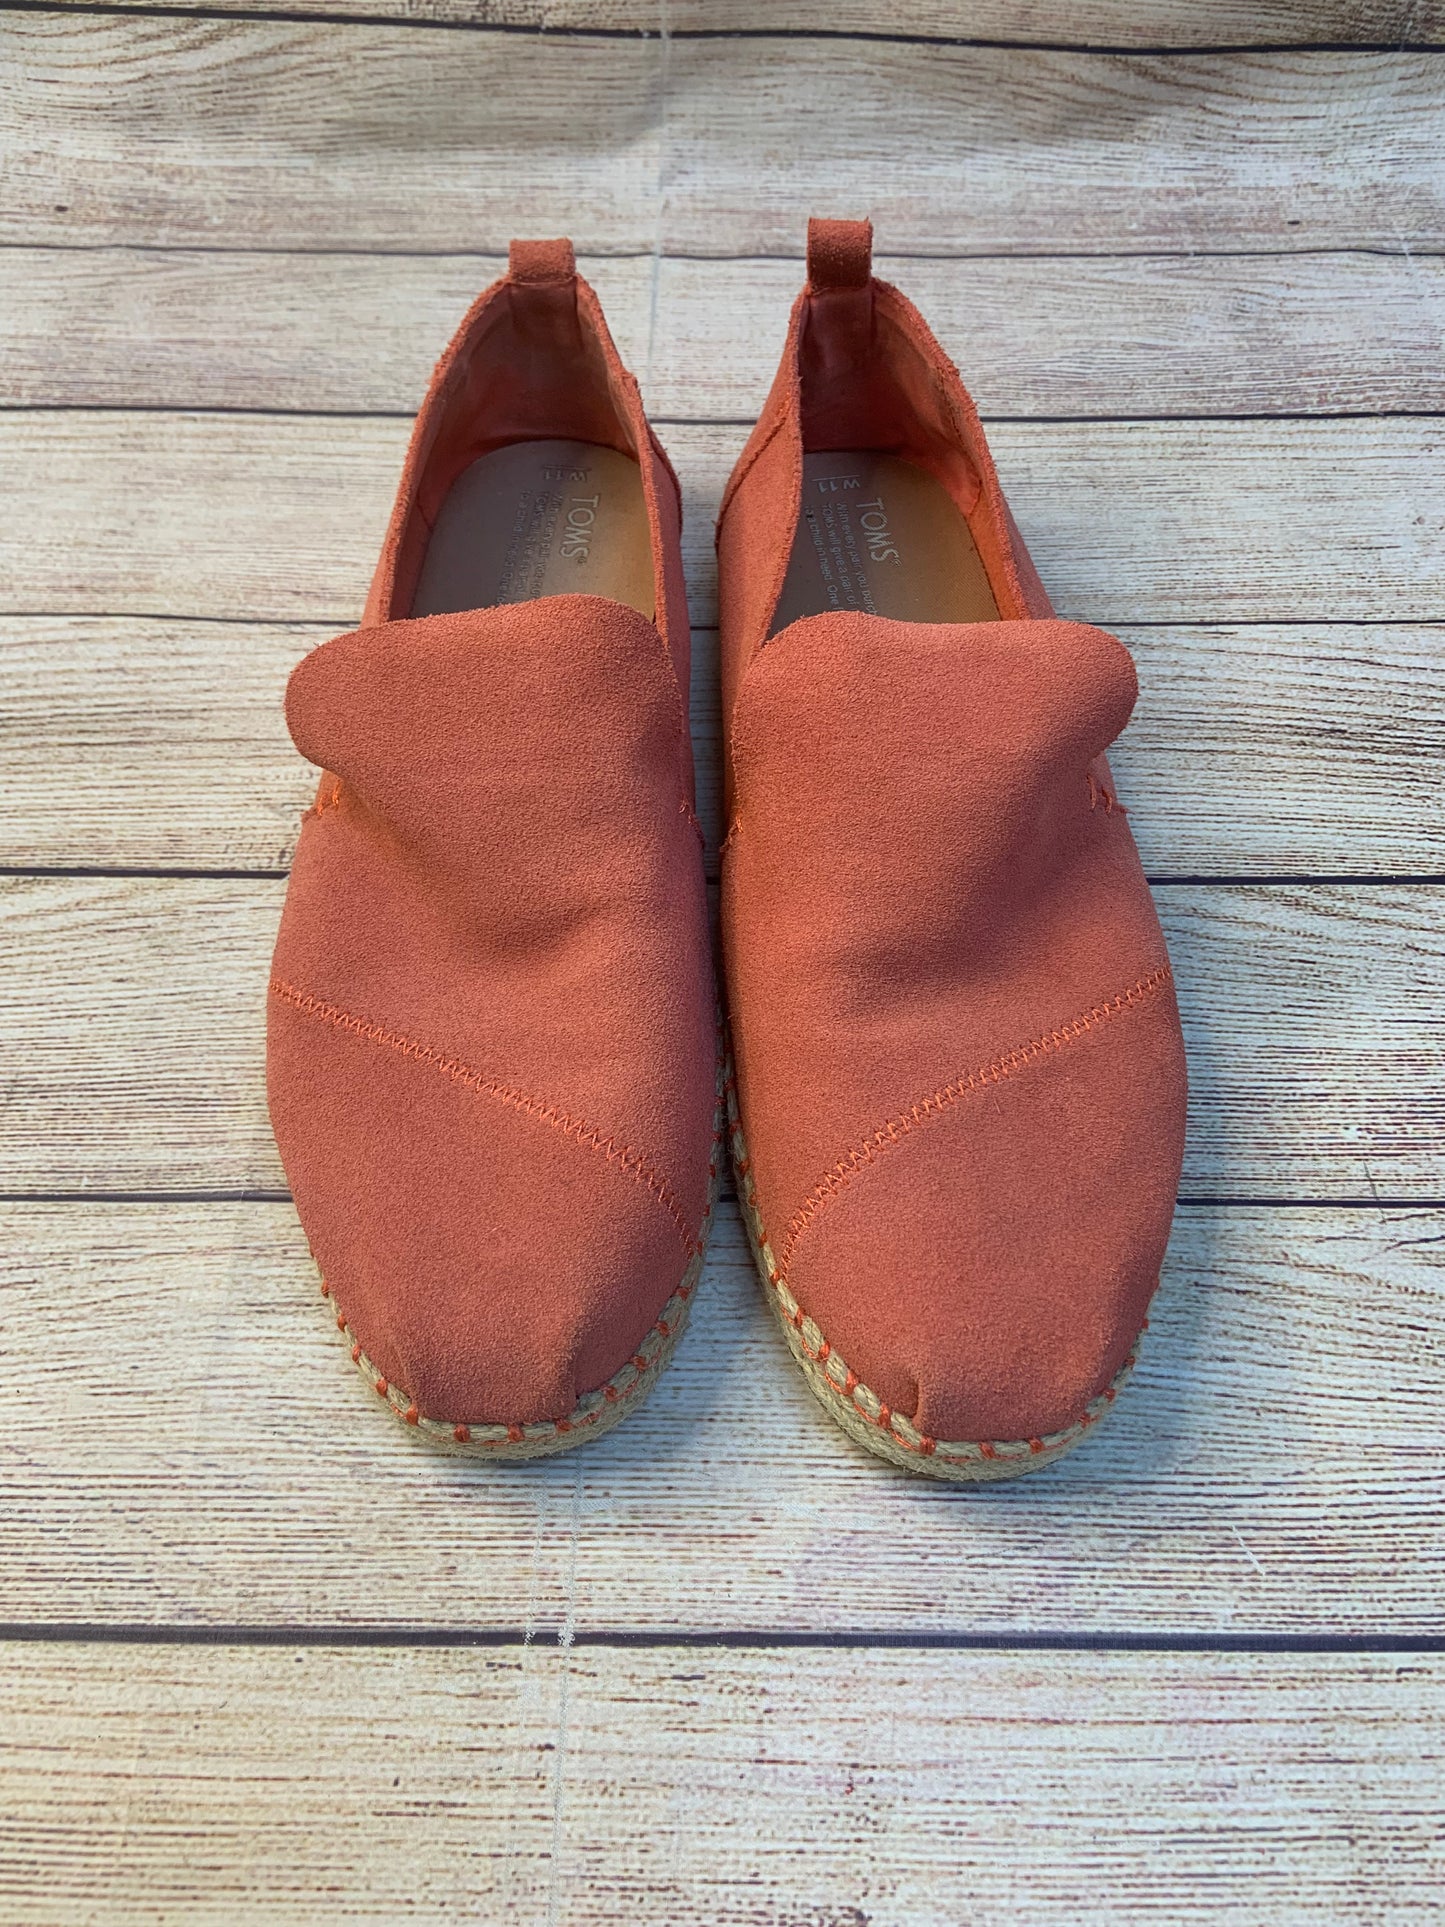 Shoes Flats Espadrille By Toms  Size: 11